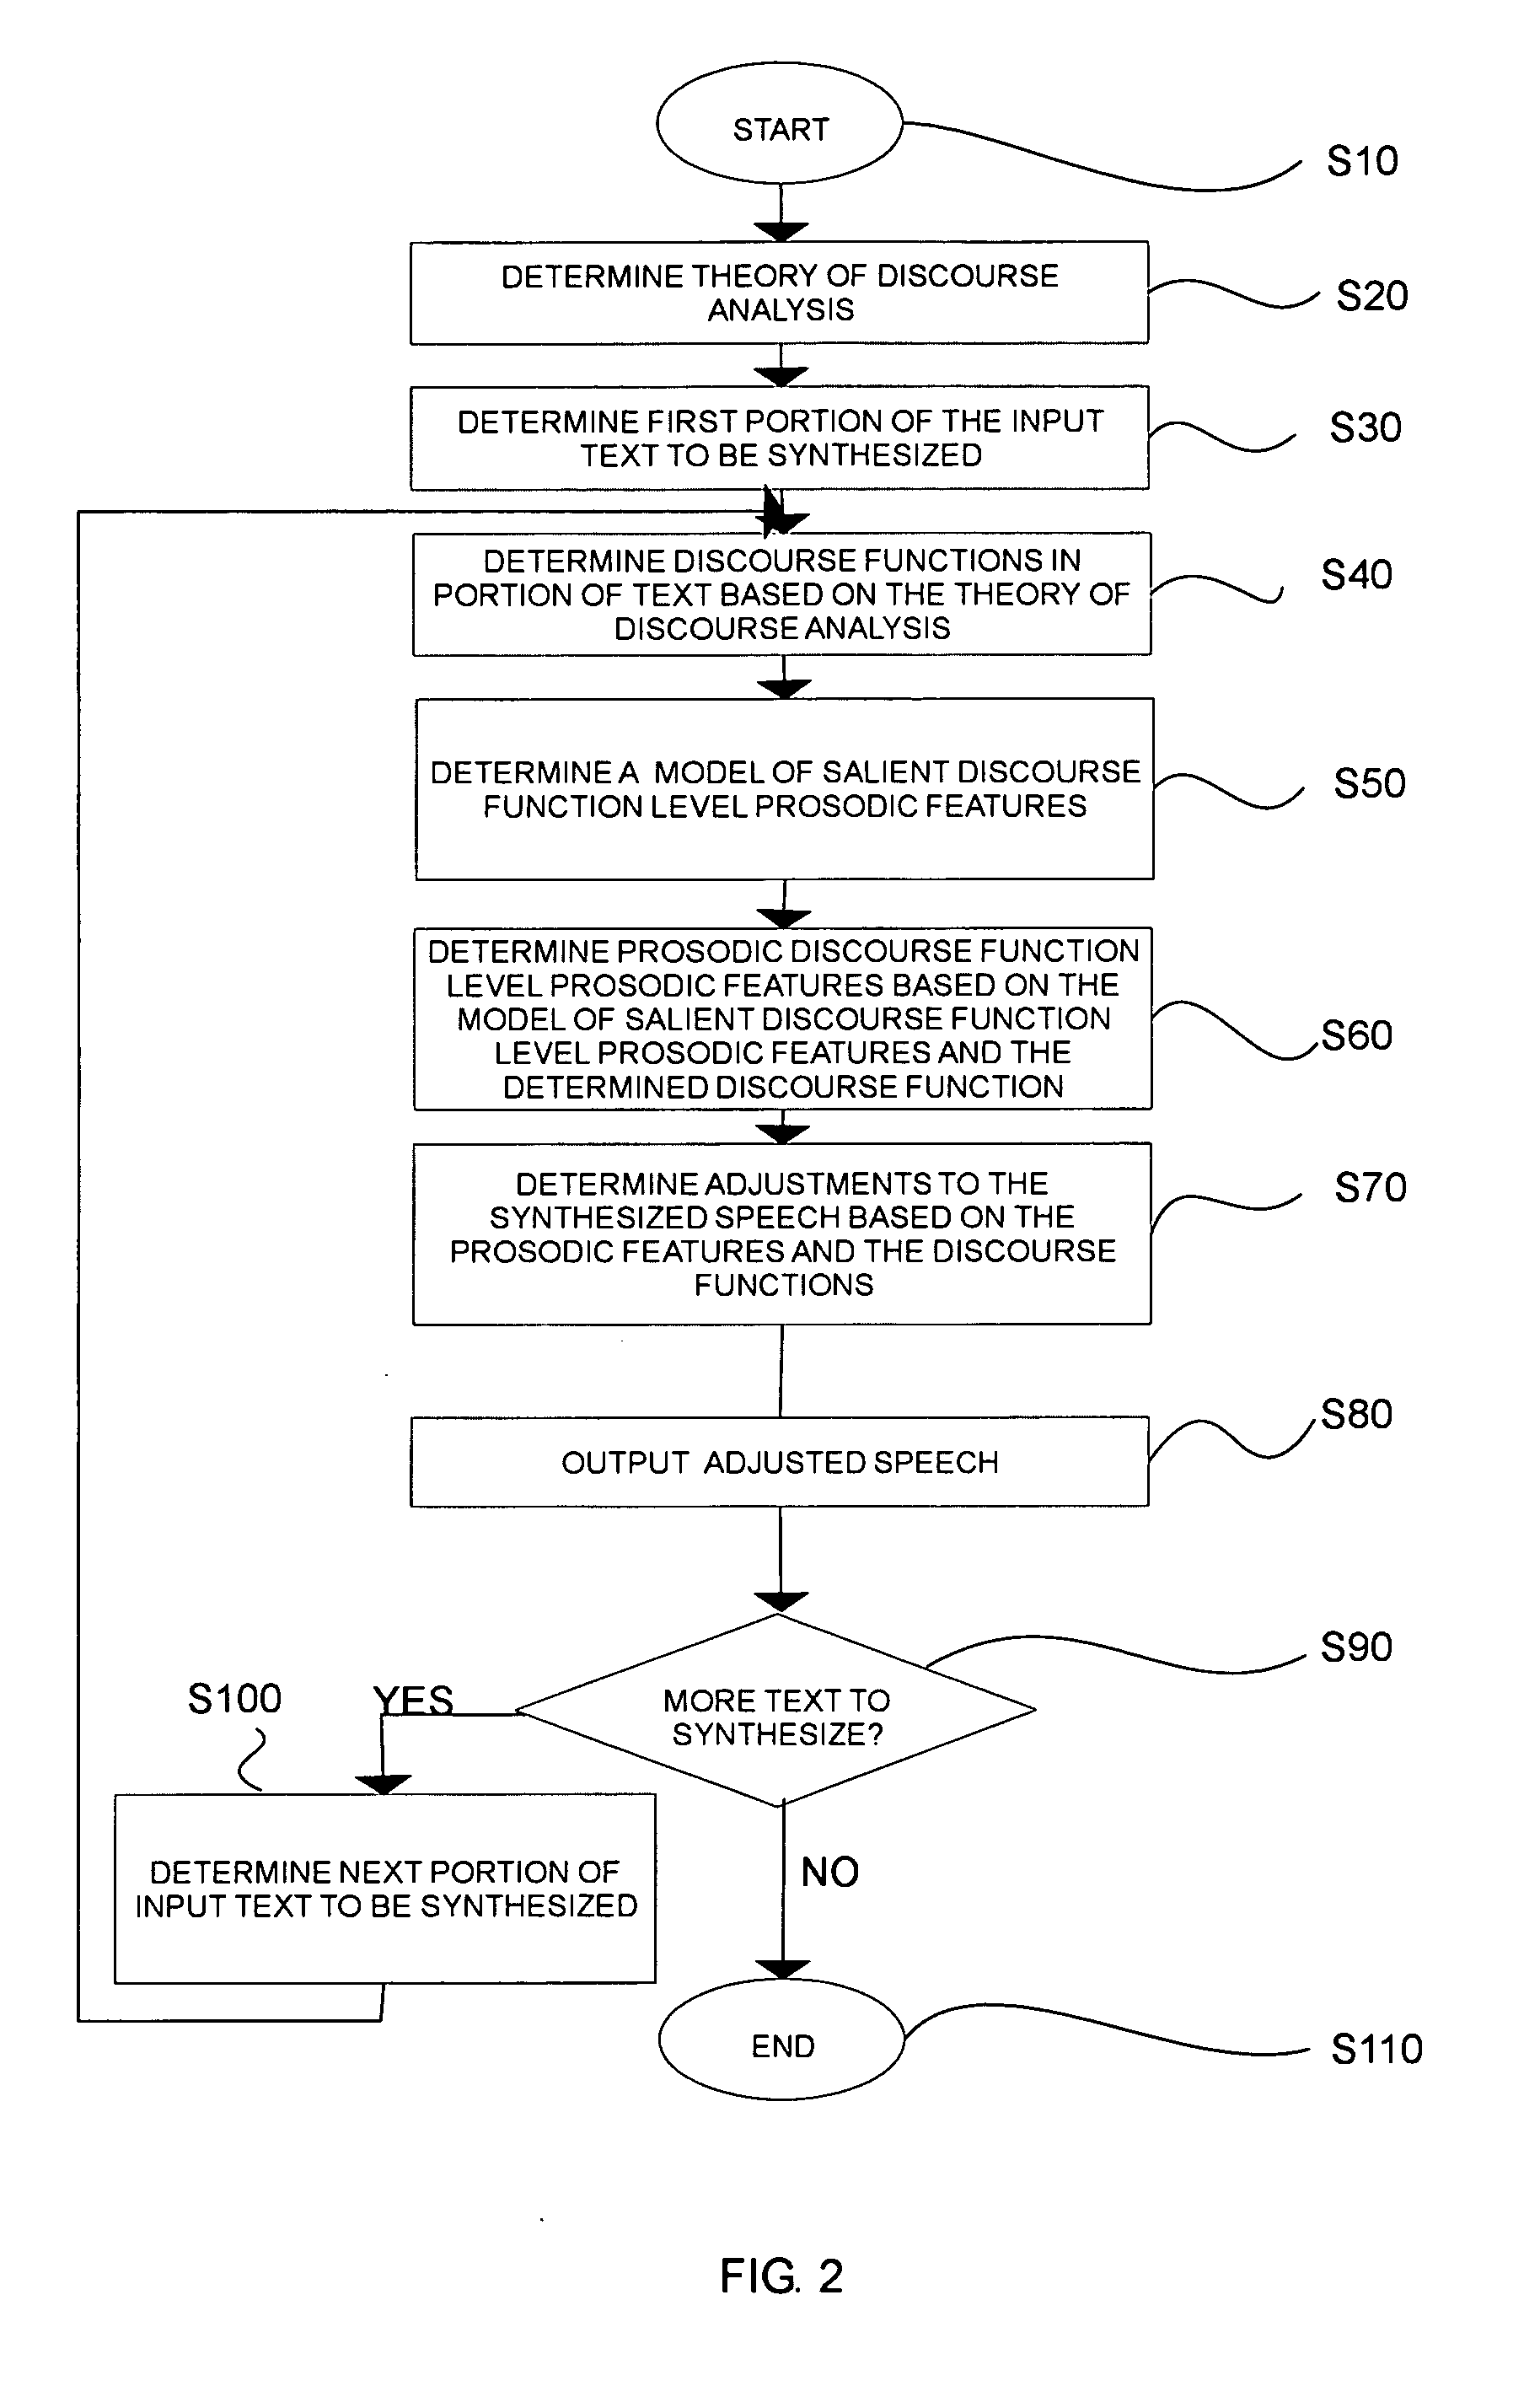 Systems and methods for synthesizing speech using discourse function level prosodic features